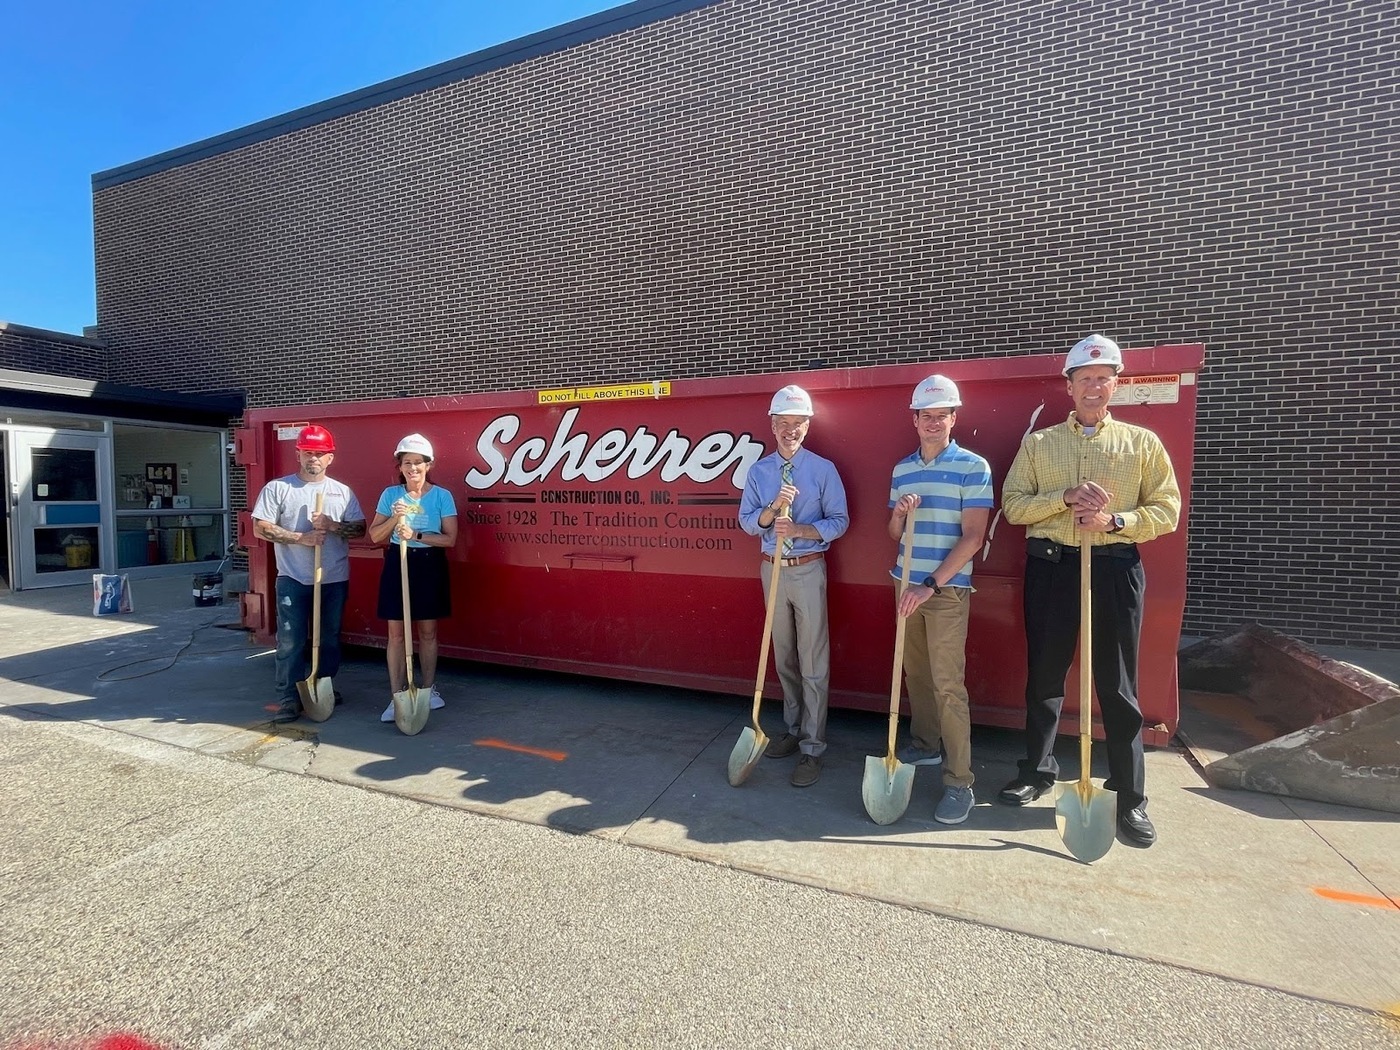 Scherrer Construction Co. Inc. is Celebrating Over 90 Years of Quality Wisconsin General Contracting Construction Services